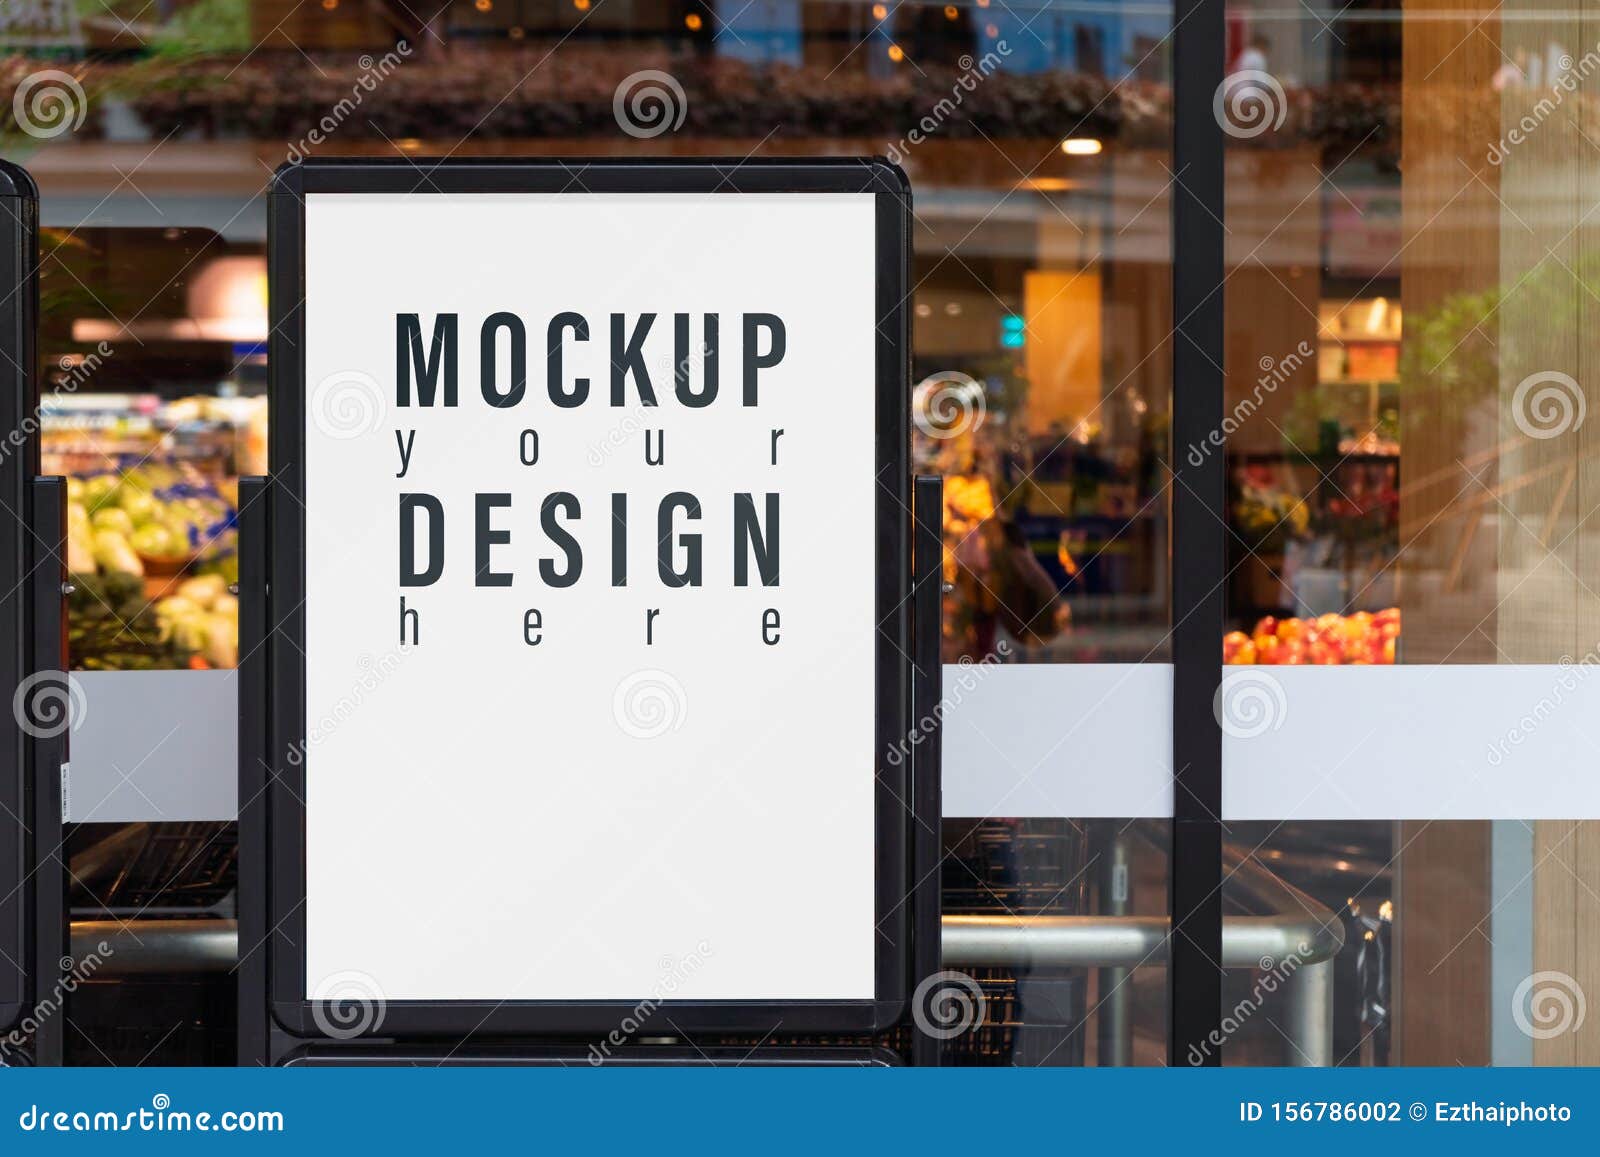 Download Mockup Advertising Board In Front Of Supermarket Mock Up Billboard For Your Text Messege Or Mock Up Content With Department Stock Photo Image Of Design Advertising 156786002